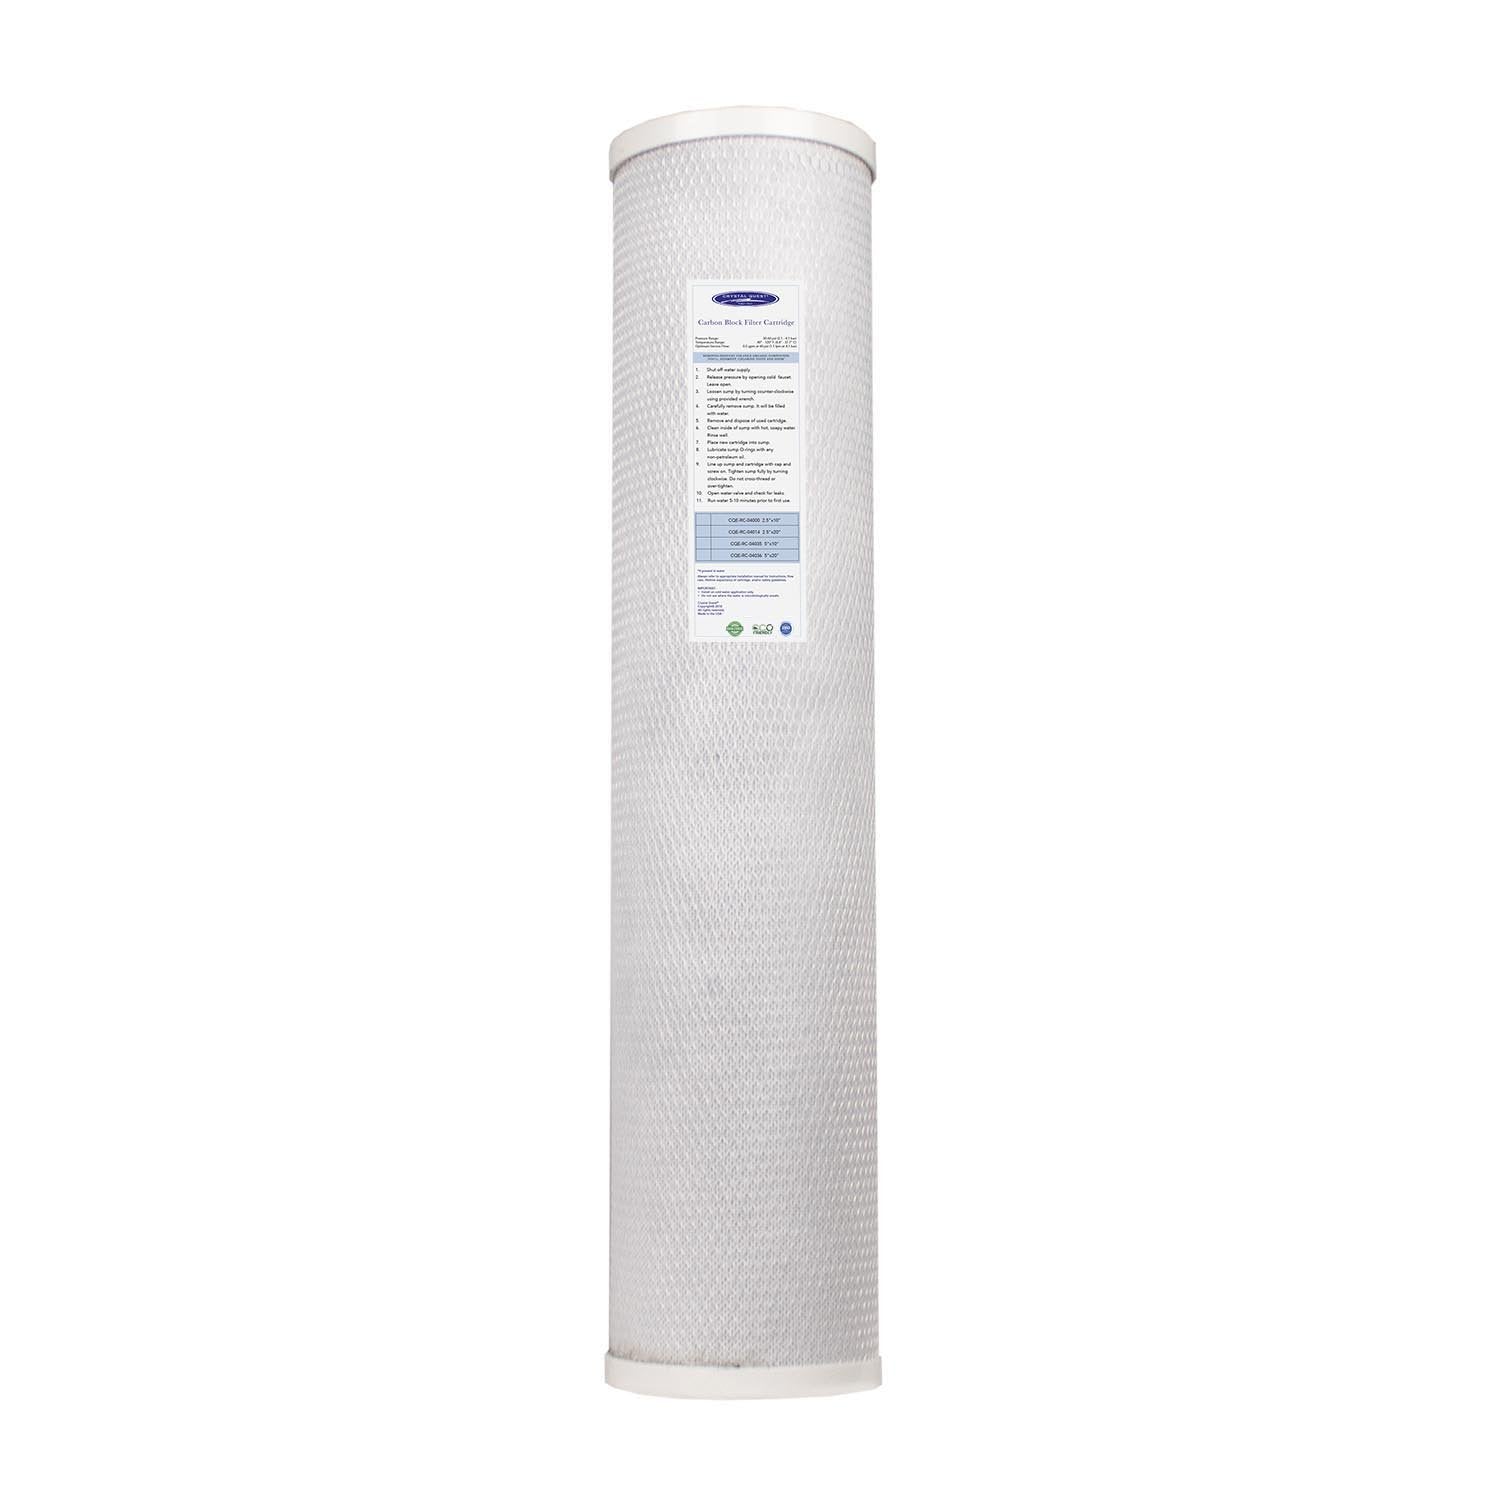 2-7/8” x 9-3/4” Coconut Based 5-Micron Carbon Block Filter Cartridge - Water Filter Cartridges - Crystal Quest